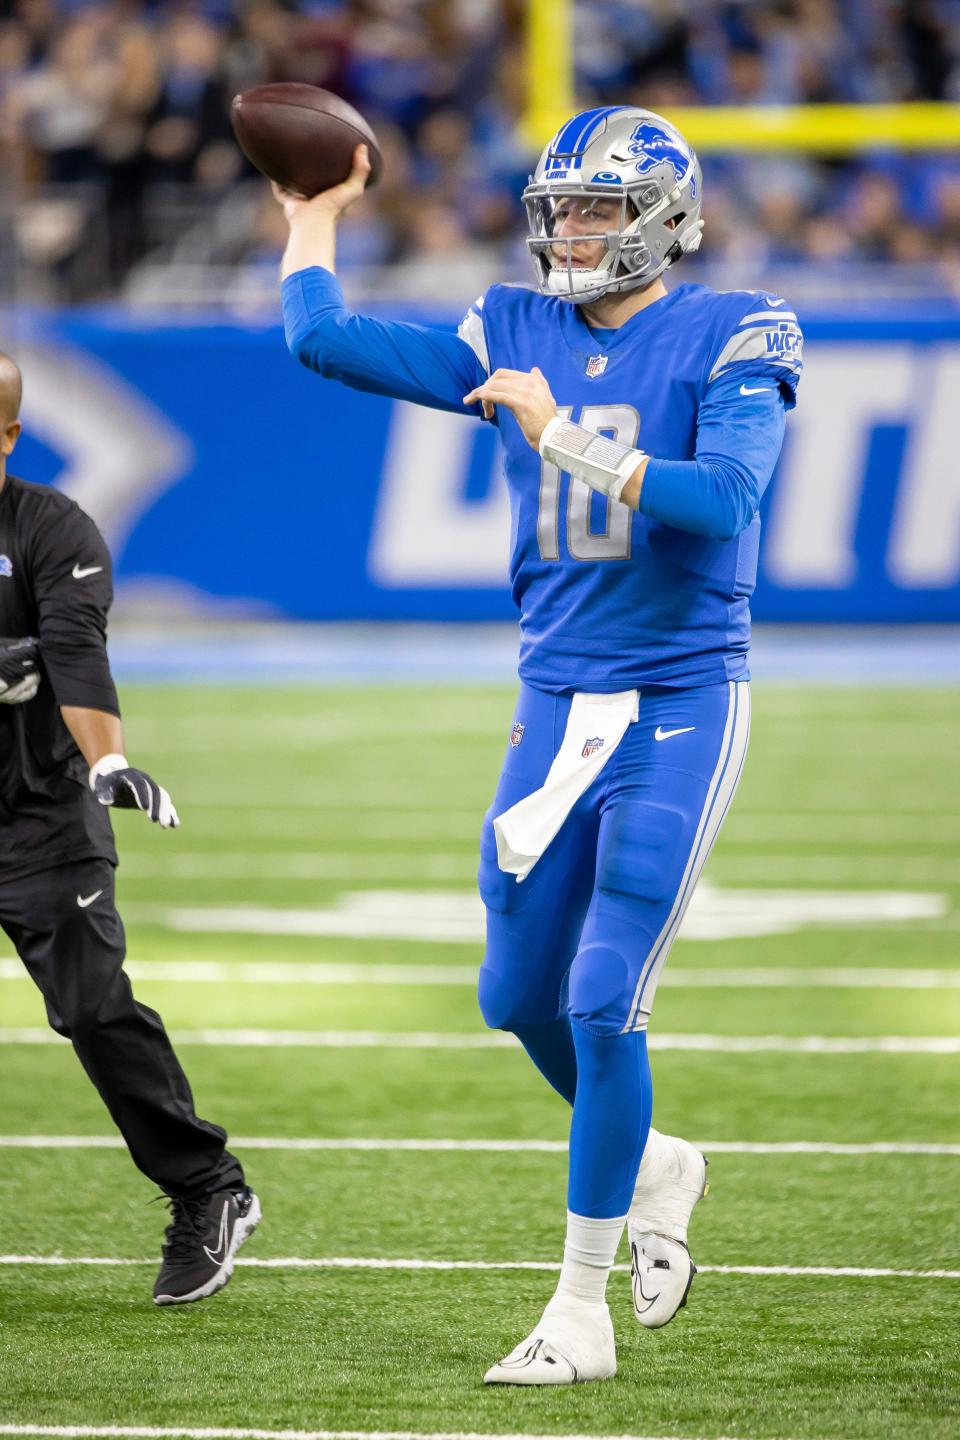 Detroit Lions quarterback Nate Sudfeld warms up before going into the game against the Jacksonville Jaguars during the second half at Ford Field, Dec. 4, 2022.